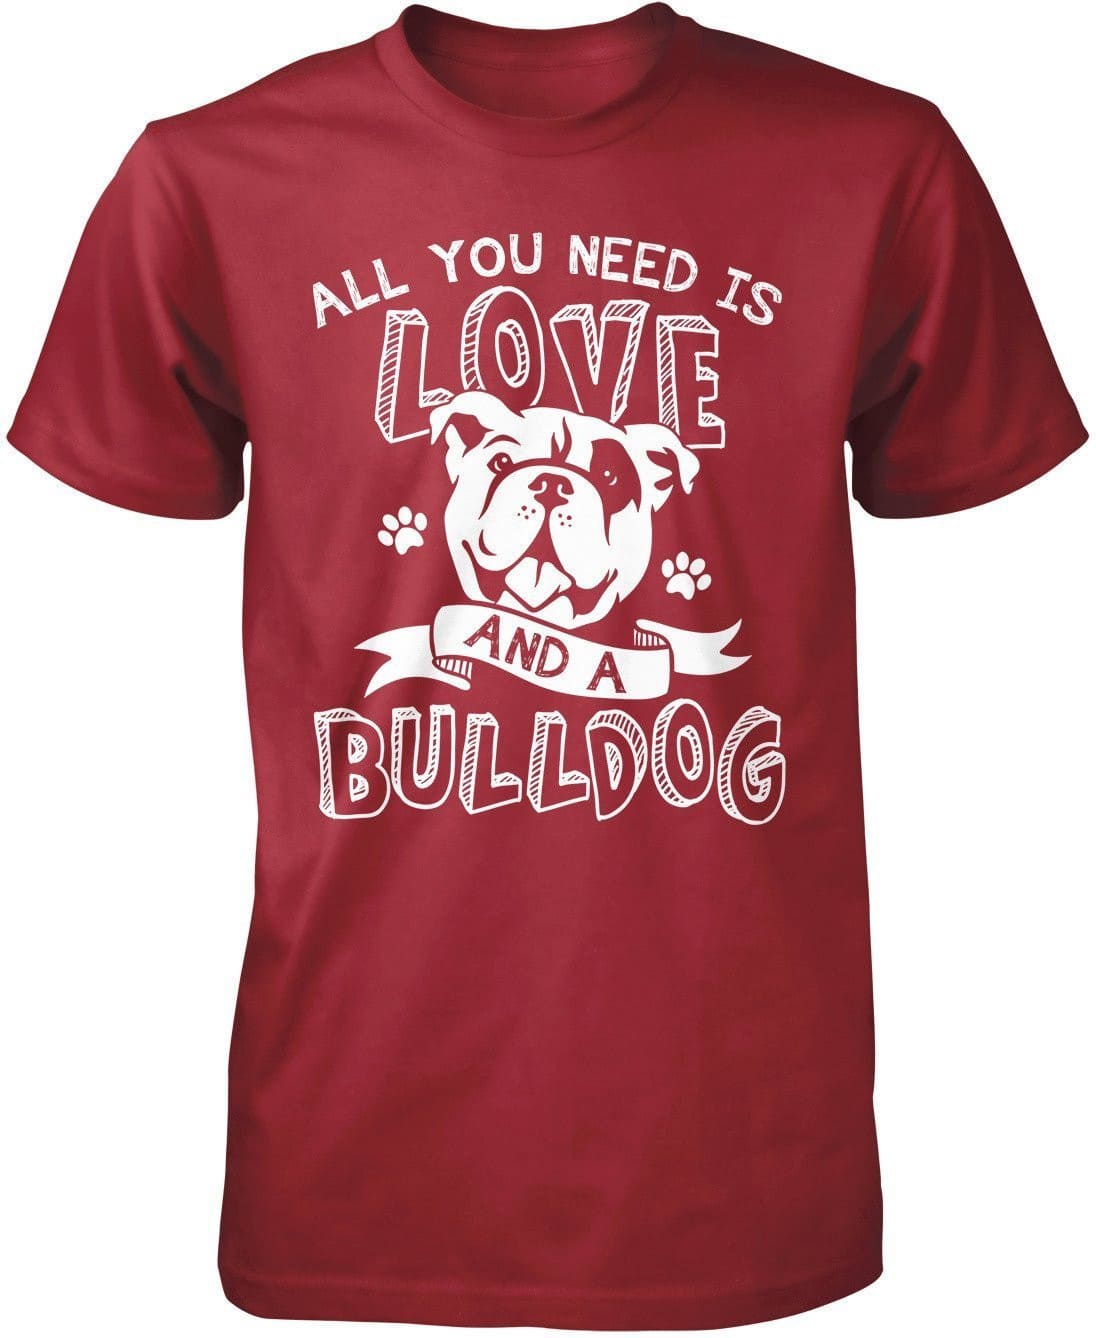 All You Need Is Love and a Bulldog T-Shirt